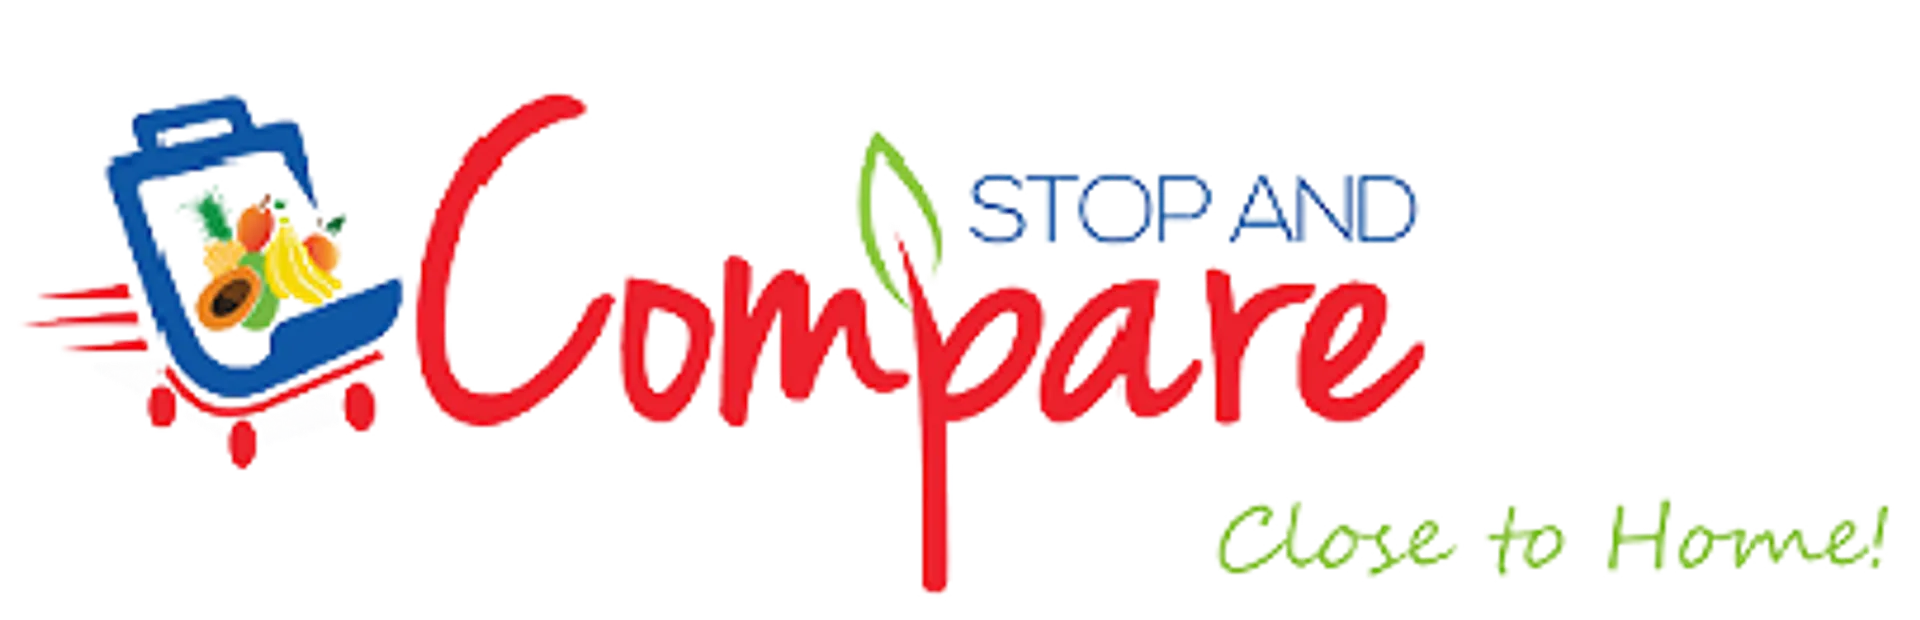 STOP AND COMPARE MARKETS logo current weekly ad